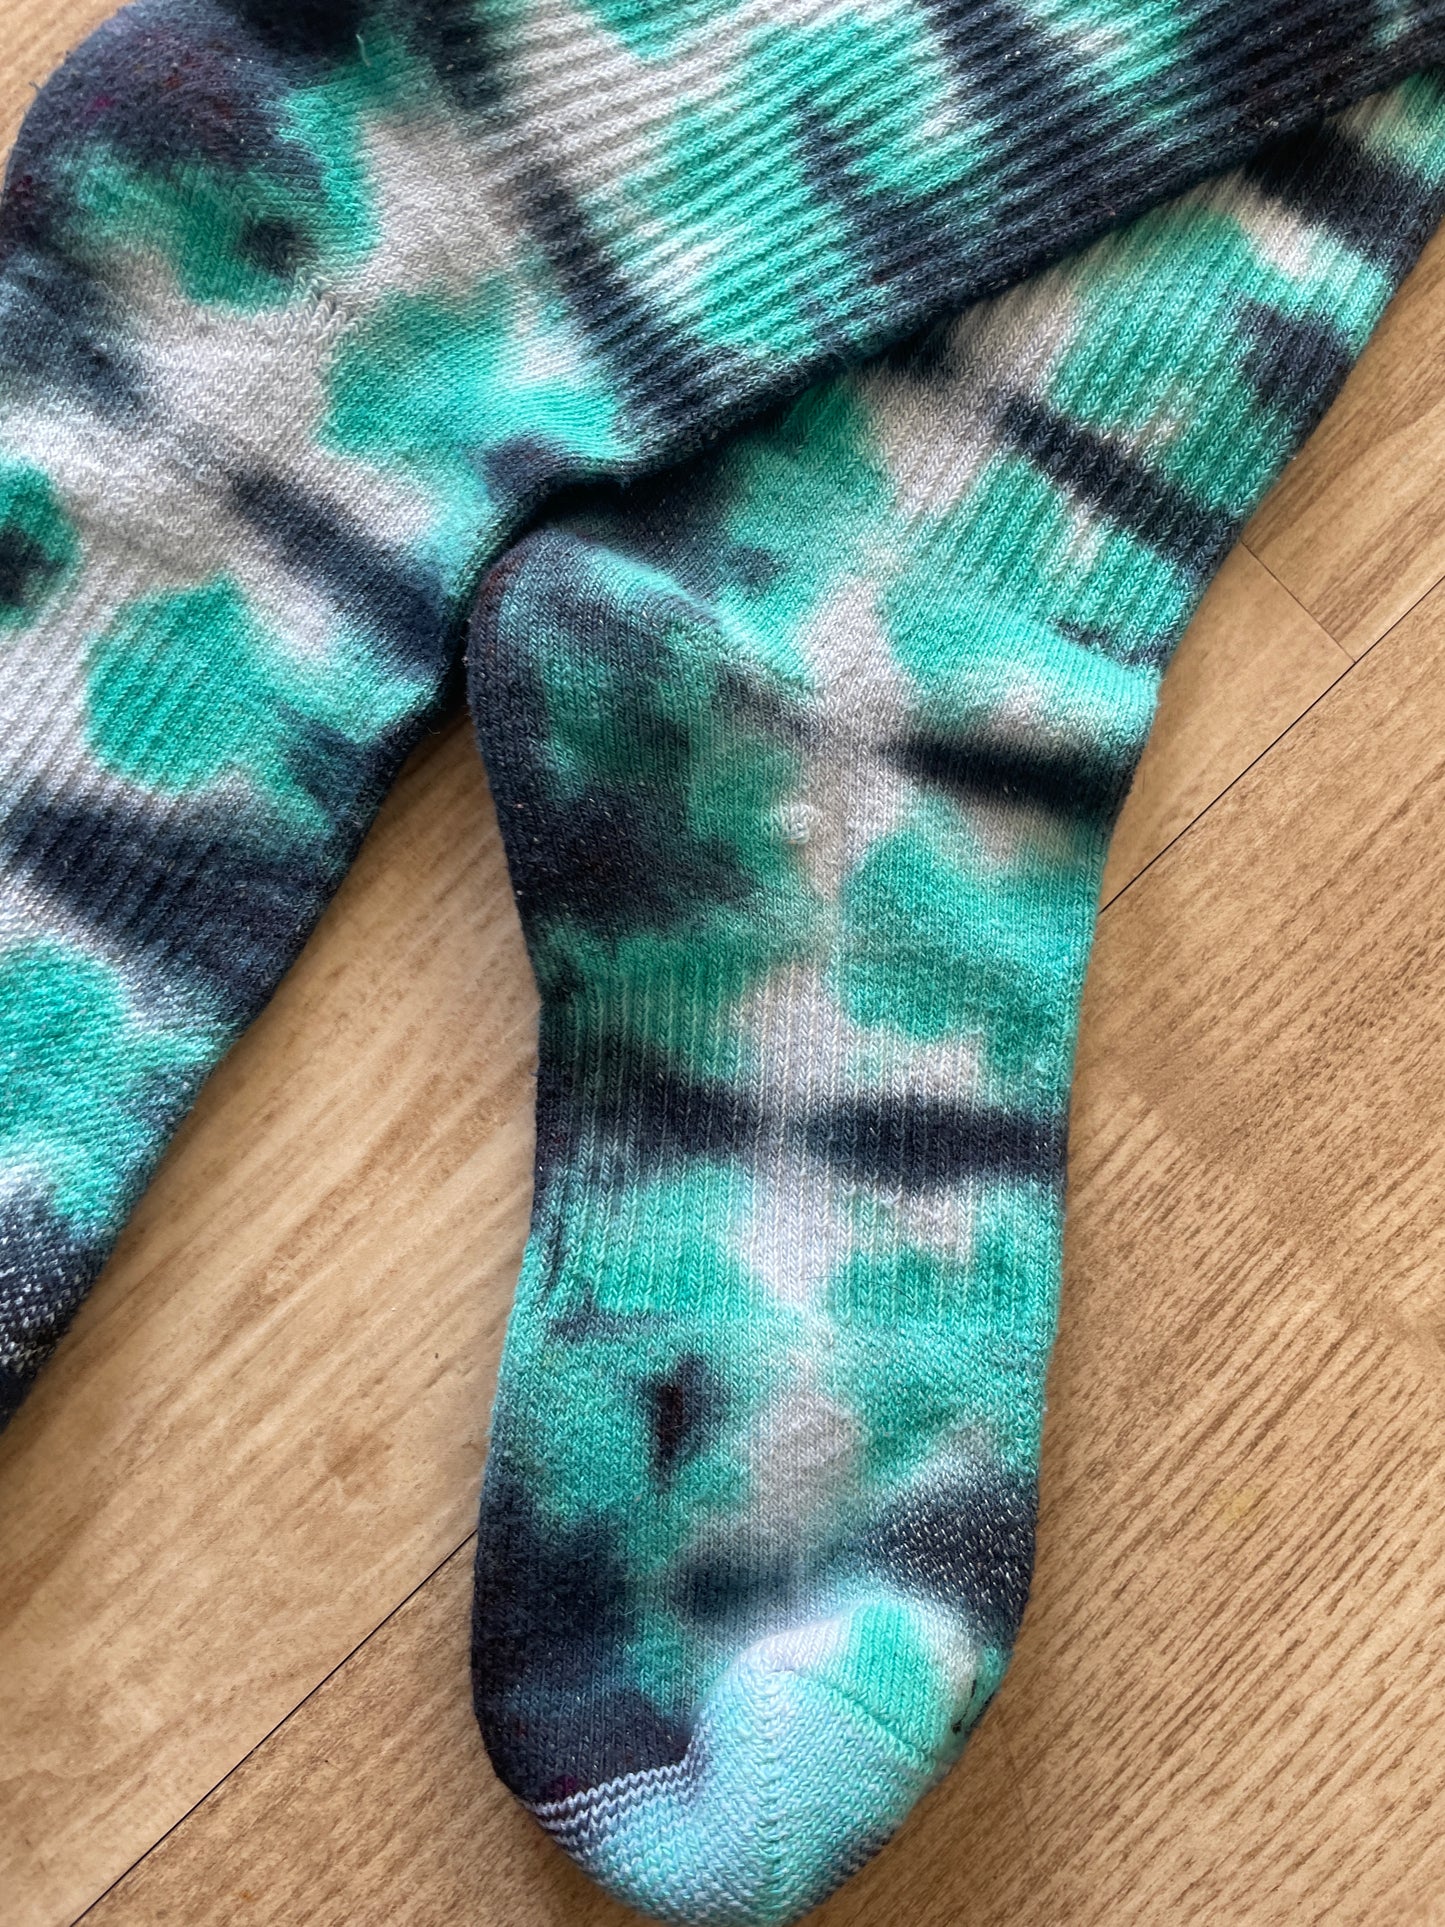 NIKE Socks Hand Tie Dyed Black and Teal Nike Dri-FIT Everyday Plus Crew Training Socks - Size Large (Men's 8-12/Women's 10-13)